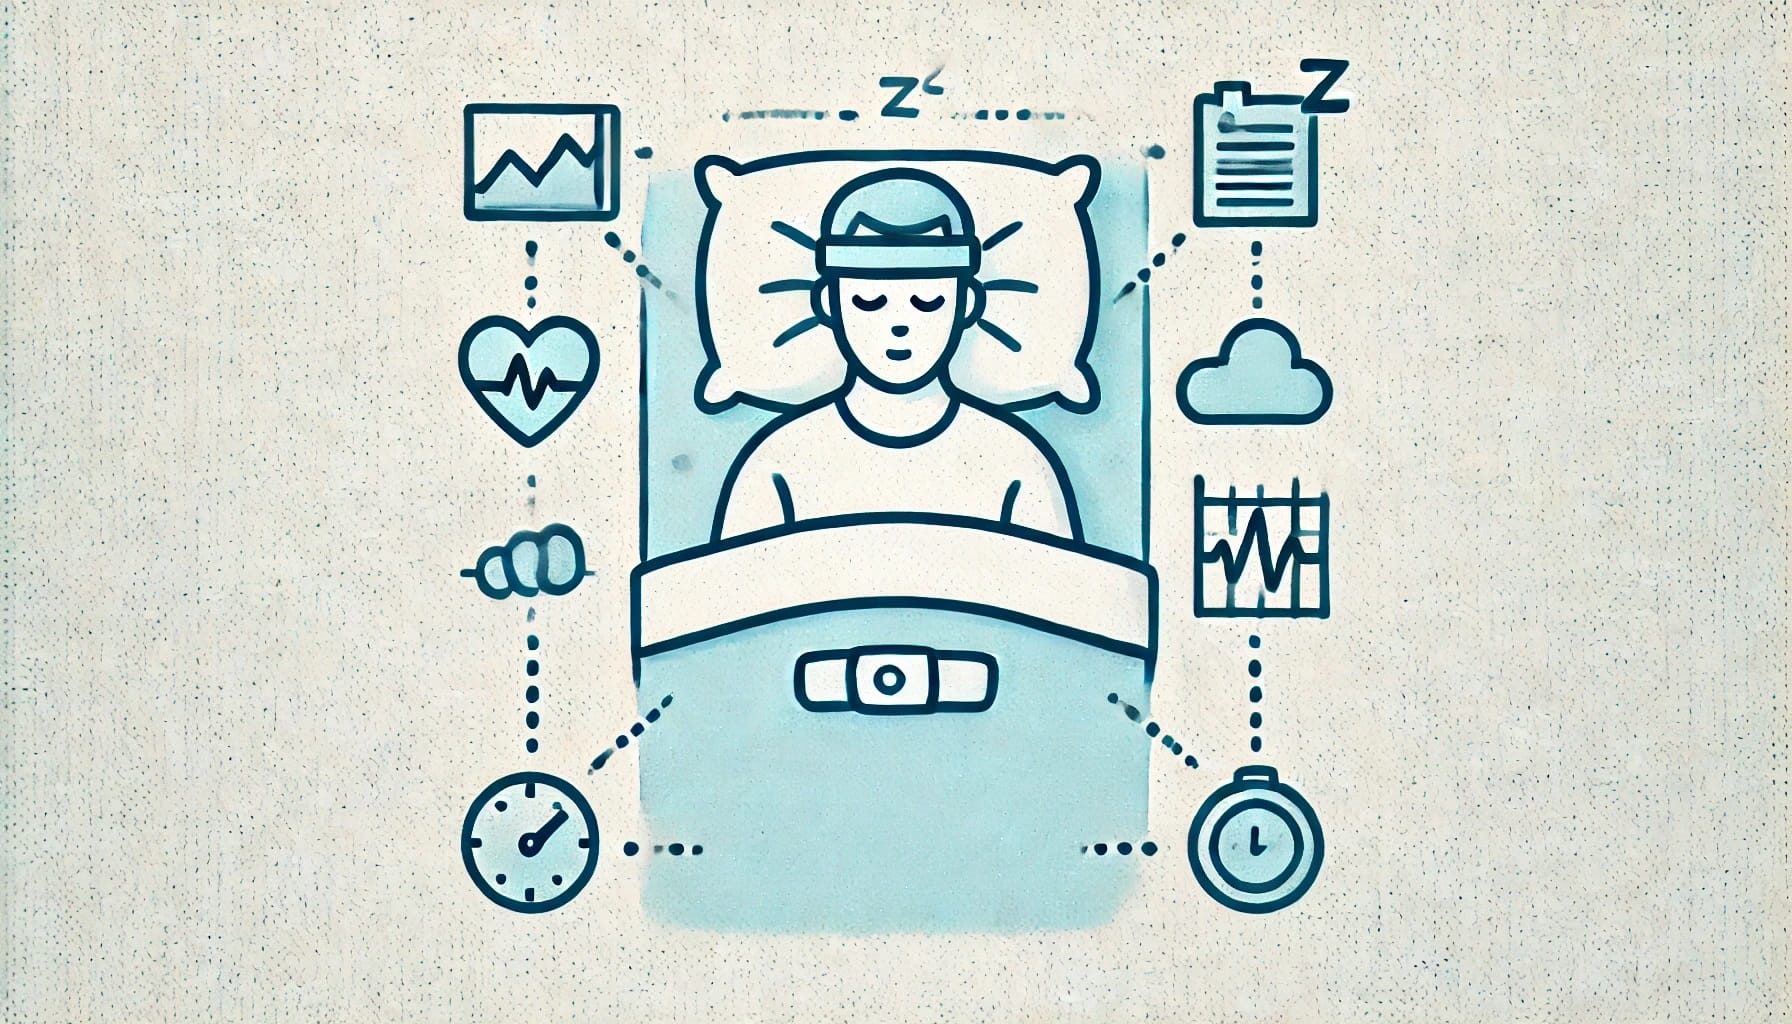 Illustration of a person lying in bed with a multifunctional wearable sleep monitoring device on their head, surrounded by various icons representing sleep data like heart rate, brain activity, and time.